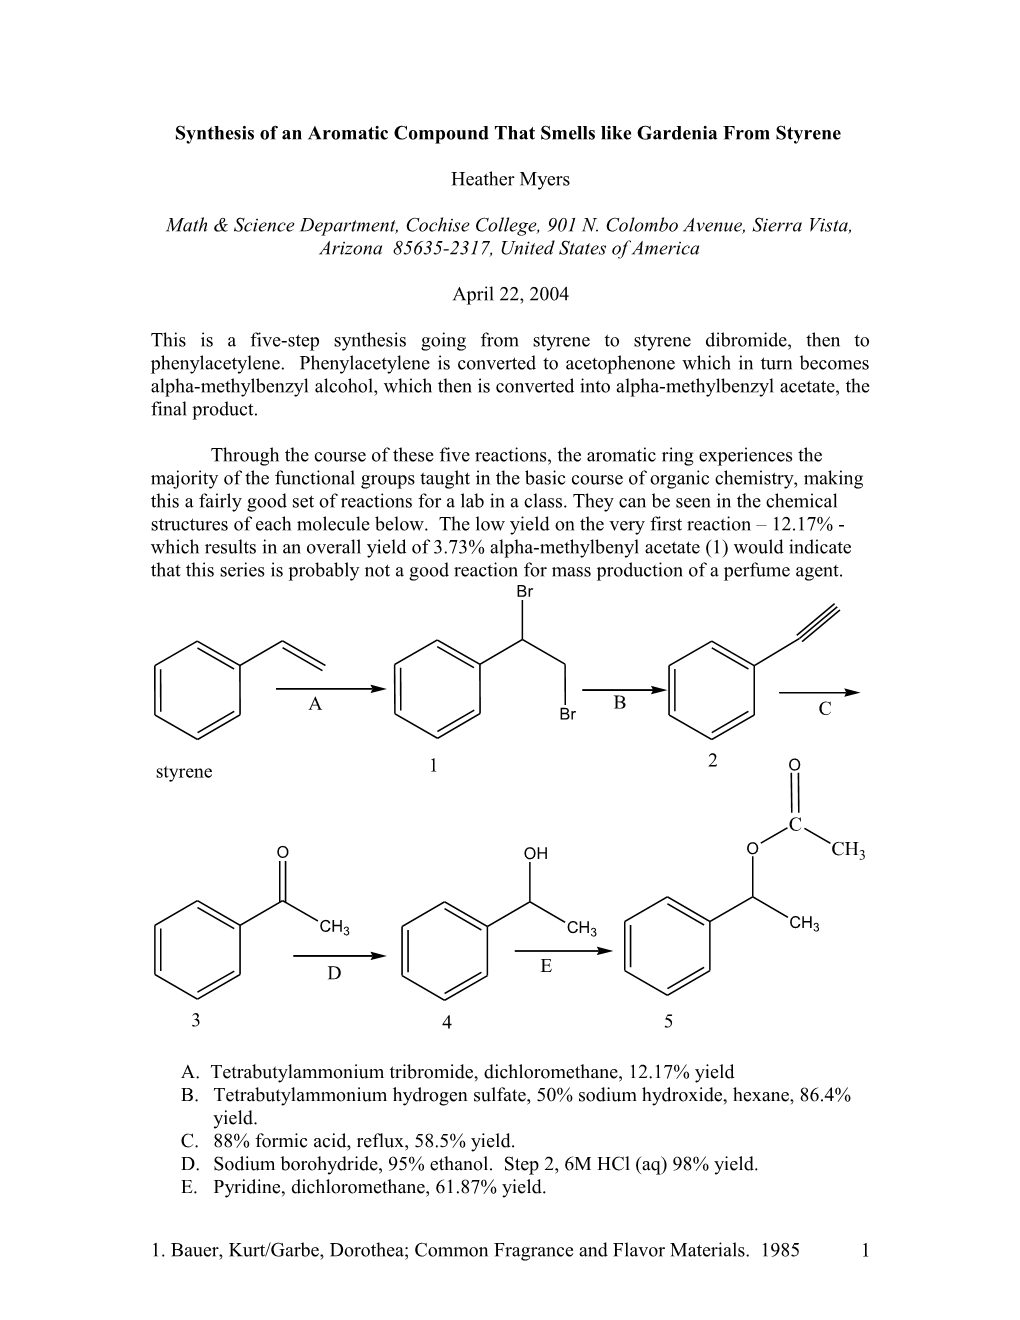 Synthesis of an Aromatic Compound That Smells Like Gardenia from Styrene